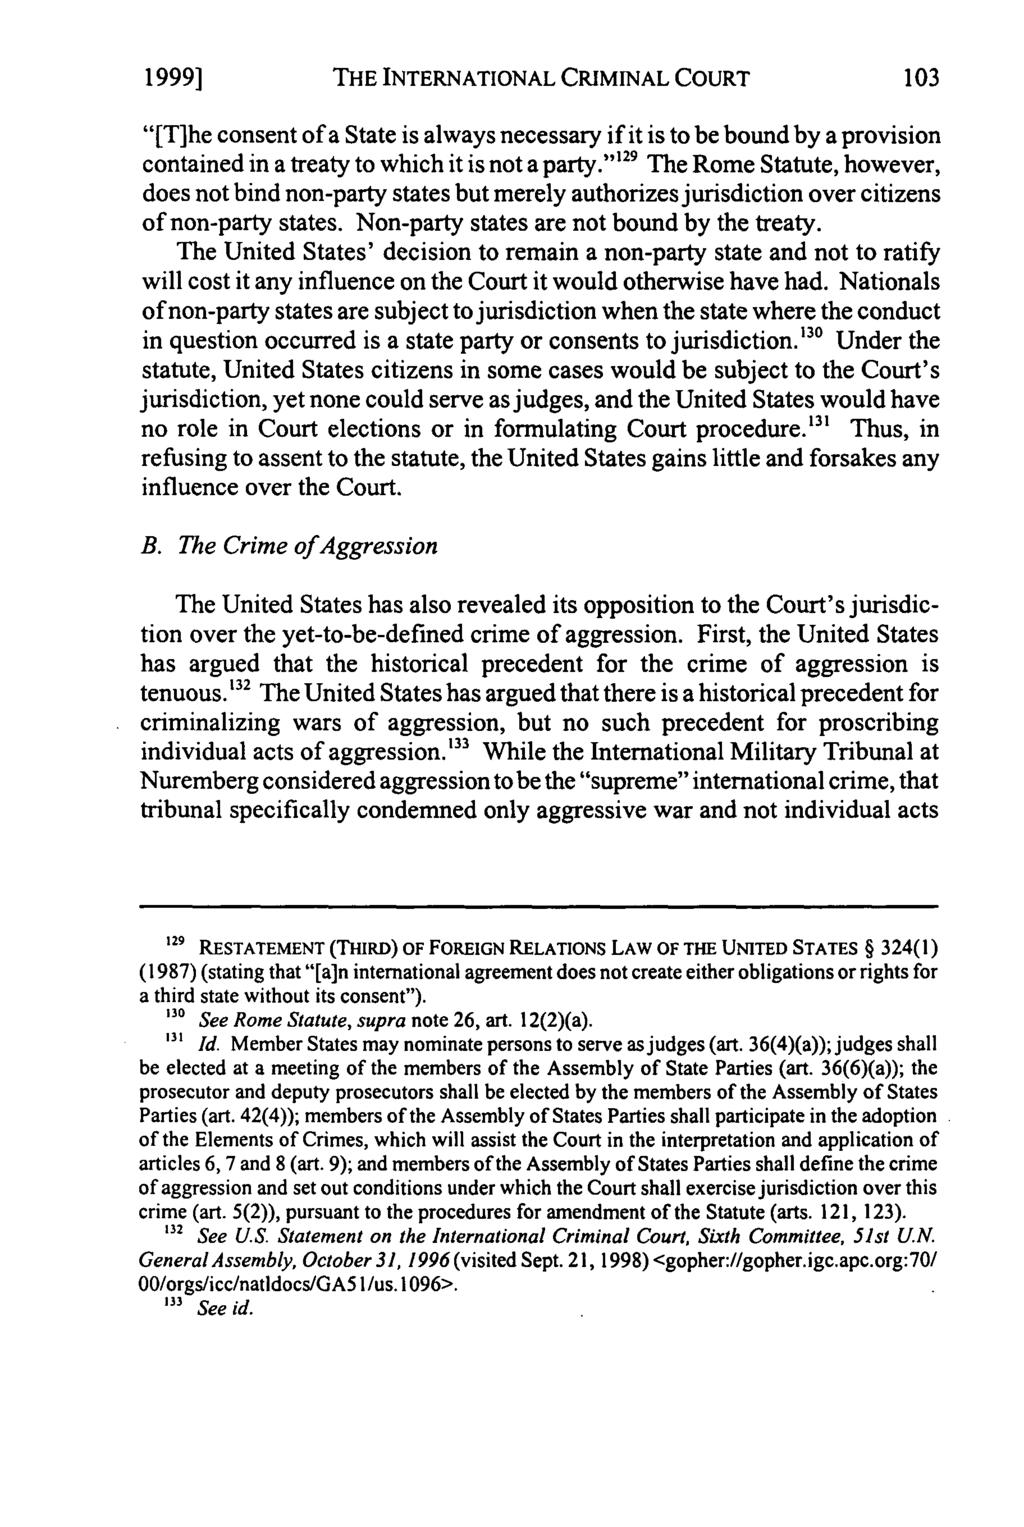 1999] THE INTERNATIONAL CRIMINAL COURT "[T]he consent of a State is always necessary if it is to be bound by a provision contained in a treaty to which it is not a party.